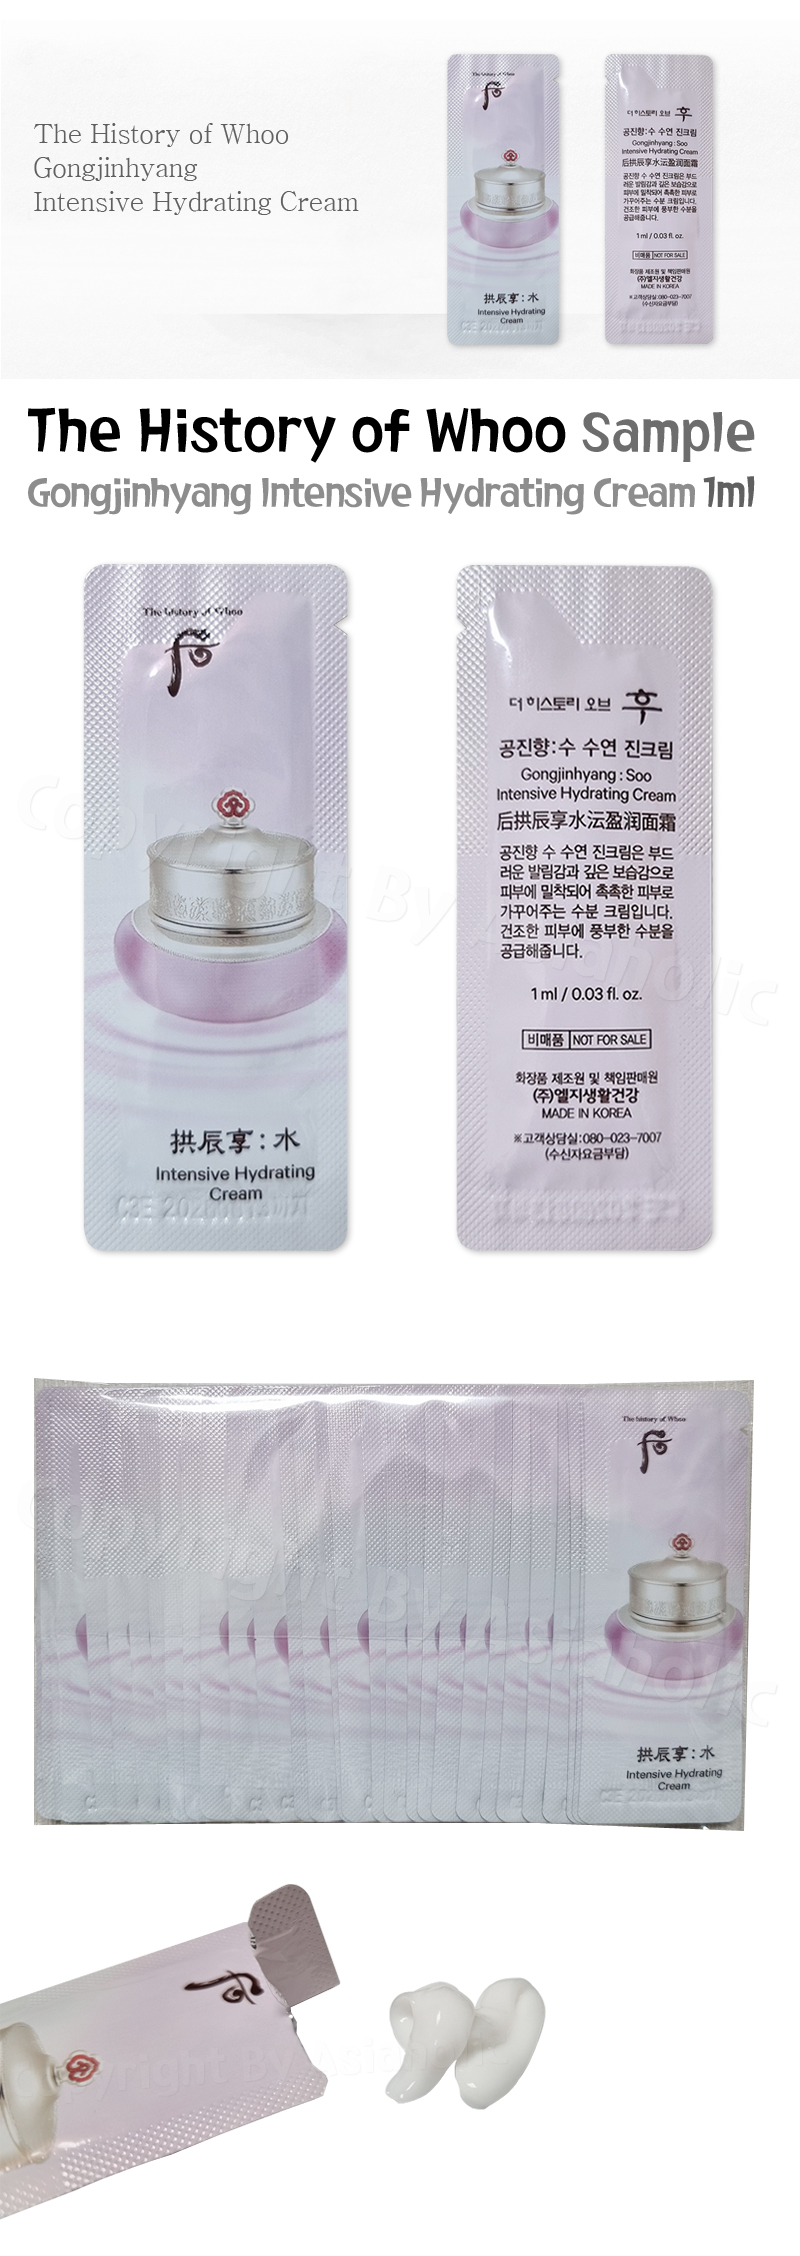 The history of Whoo Soo Yeon Intensive Hydrating Cream 1ml x 50pcs (50ml) Sample Newest Version